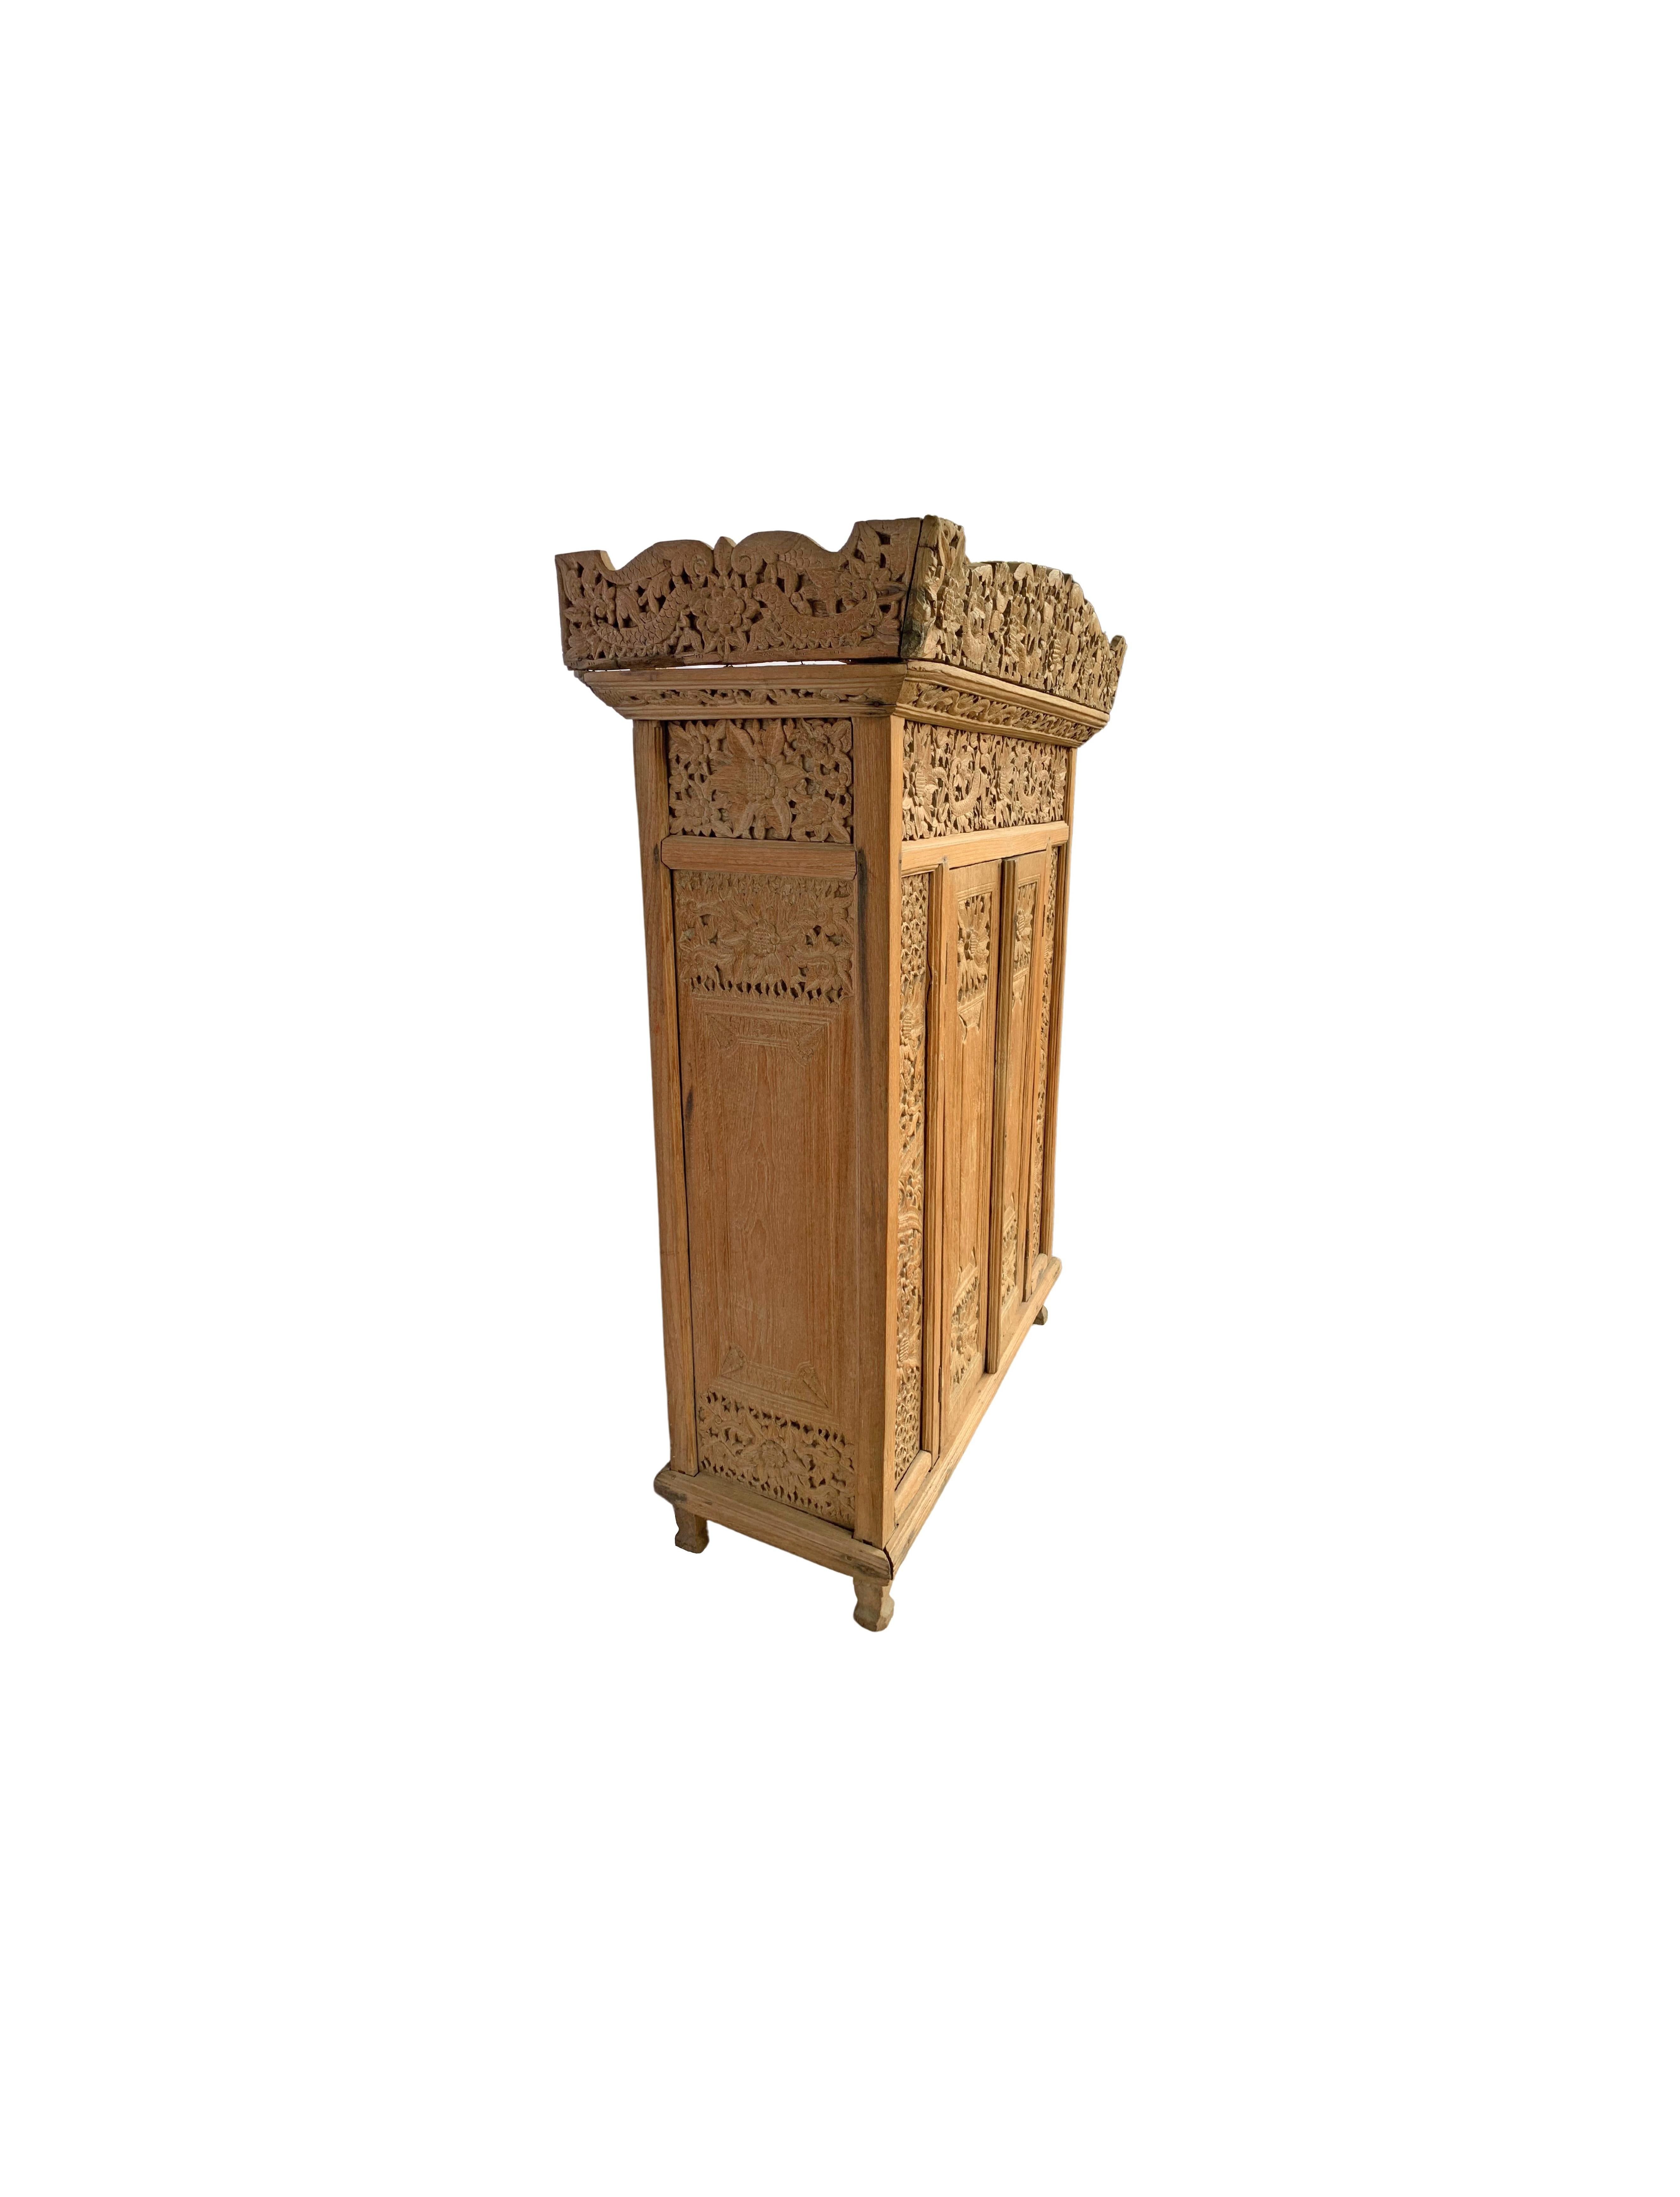 Hand-Carved Indonesian Teak Cabinet from Java with Elaborate Carved Detailing, c. 1950